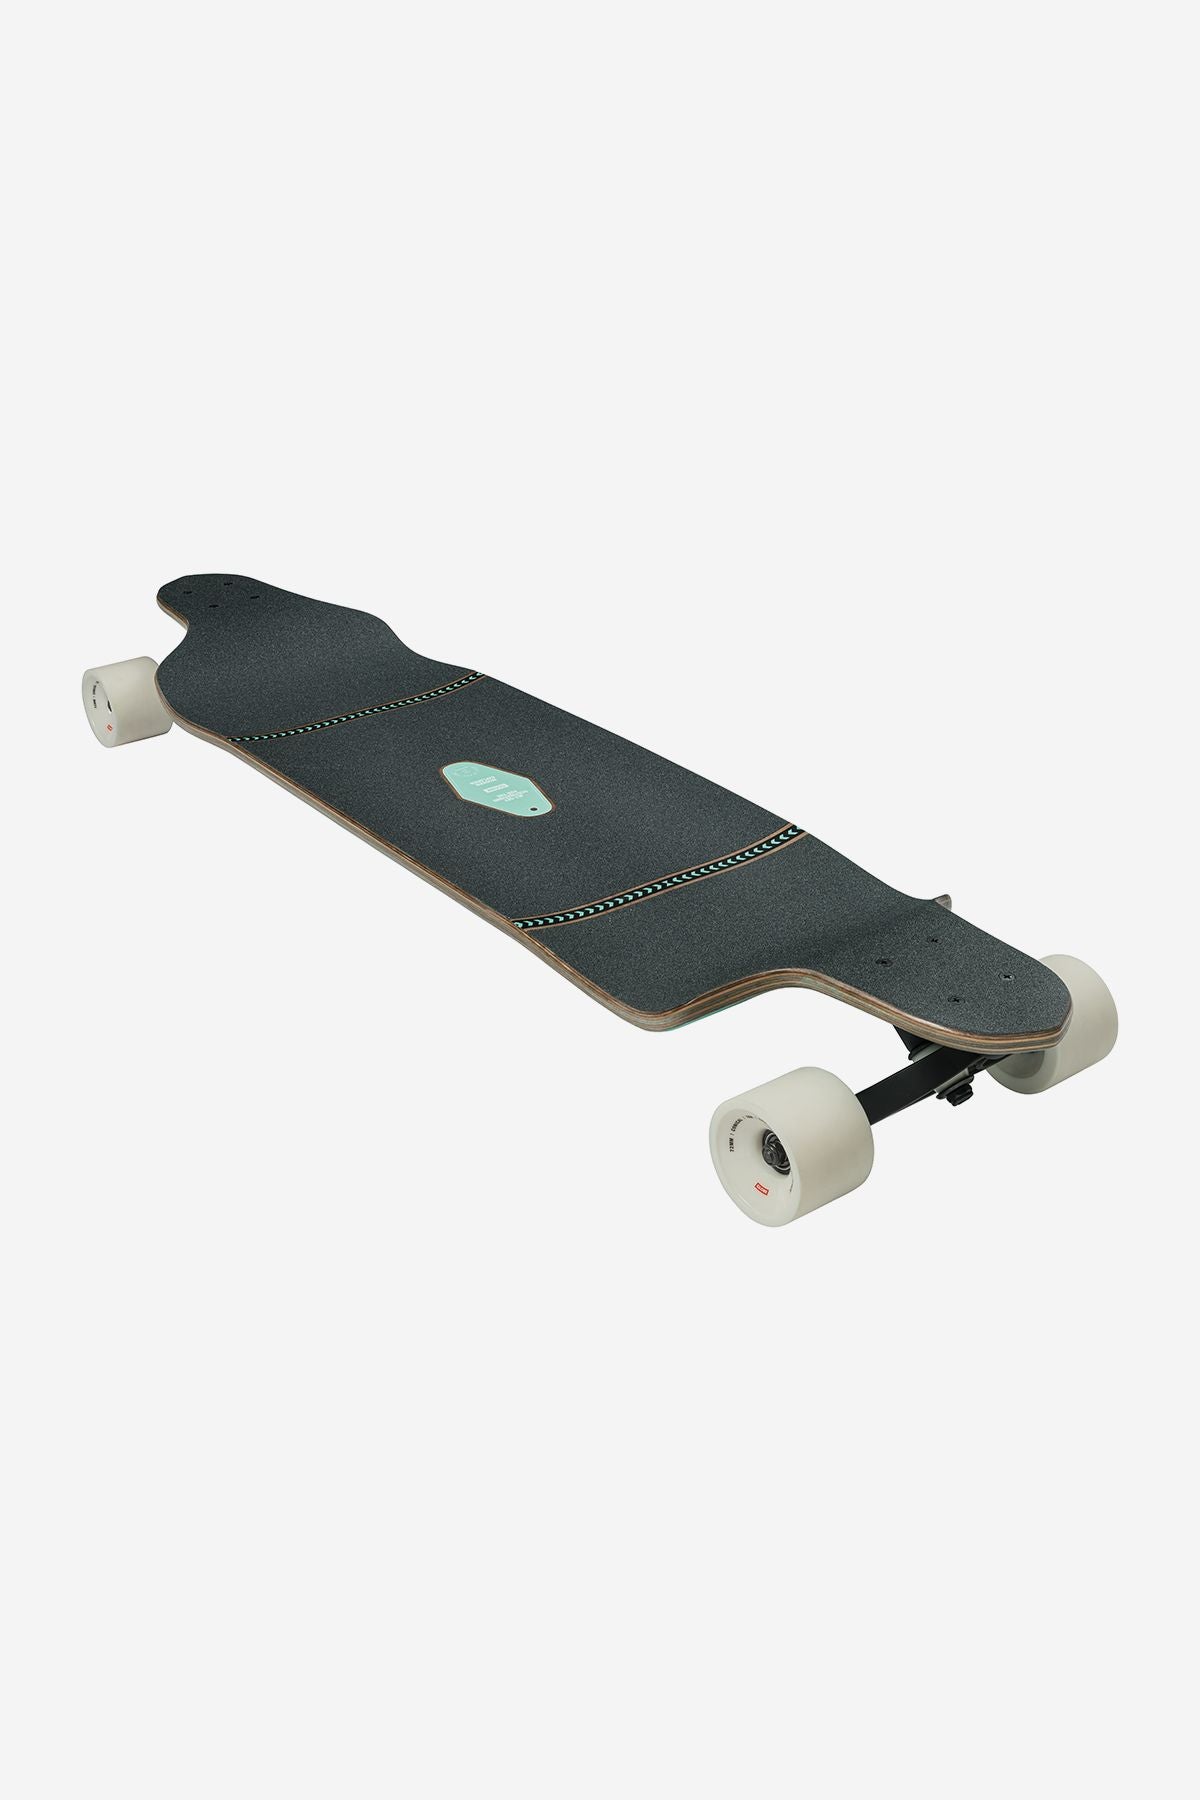 front angled Bannerstone 41" Longboard - Lodge